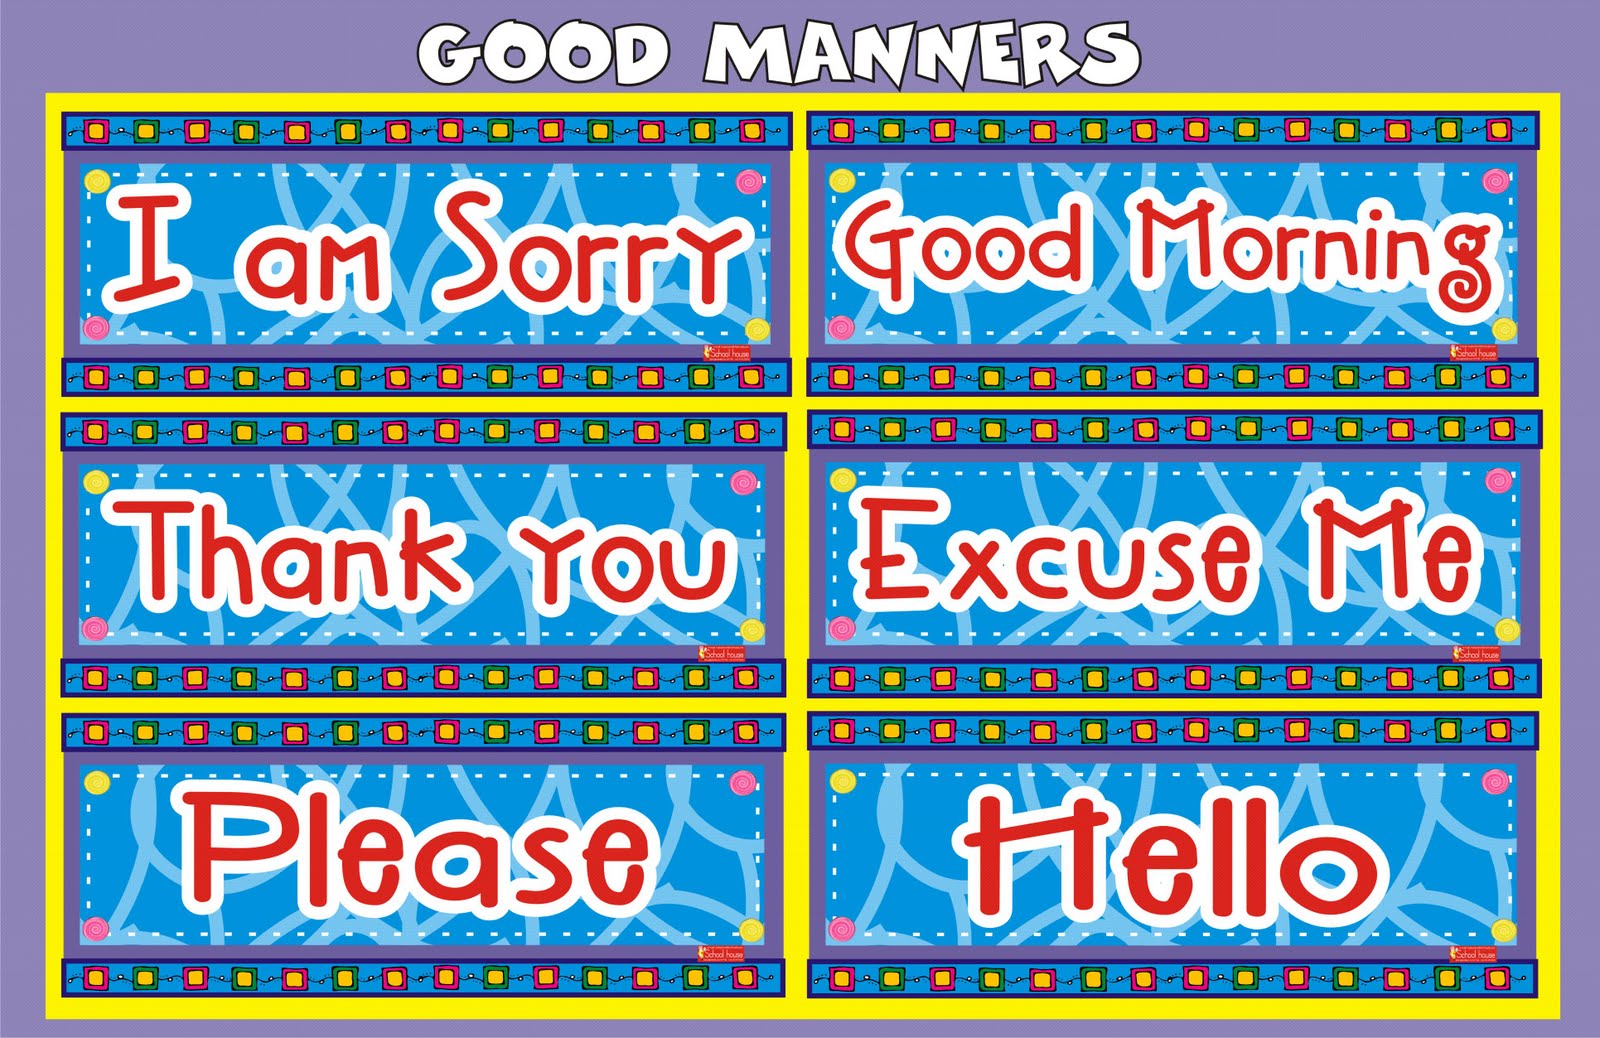 clipart on good manners - photo #45